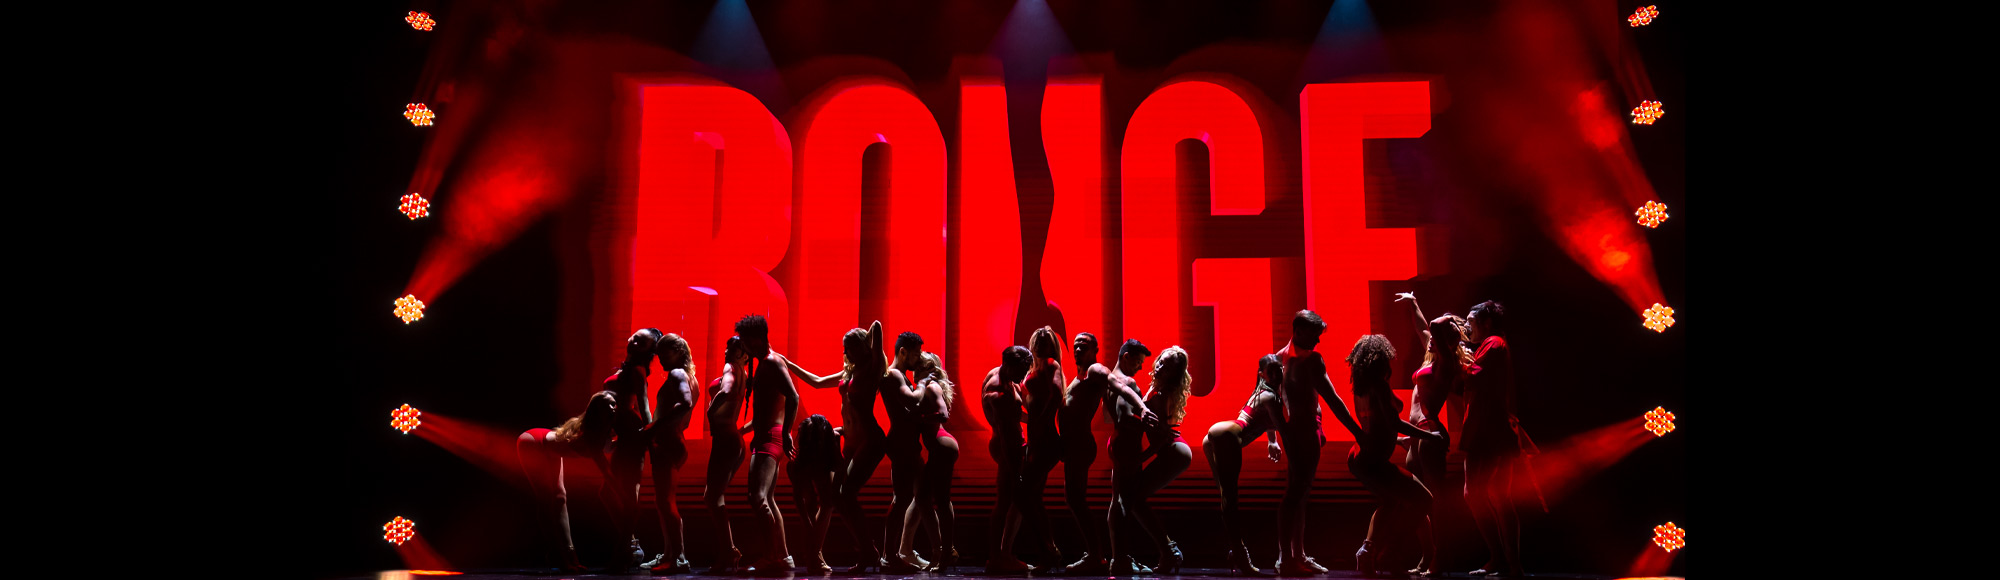 ROUGE - The Sexiest Show in Vegas! show